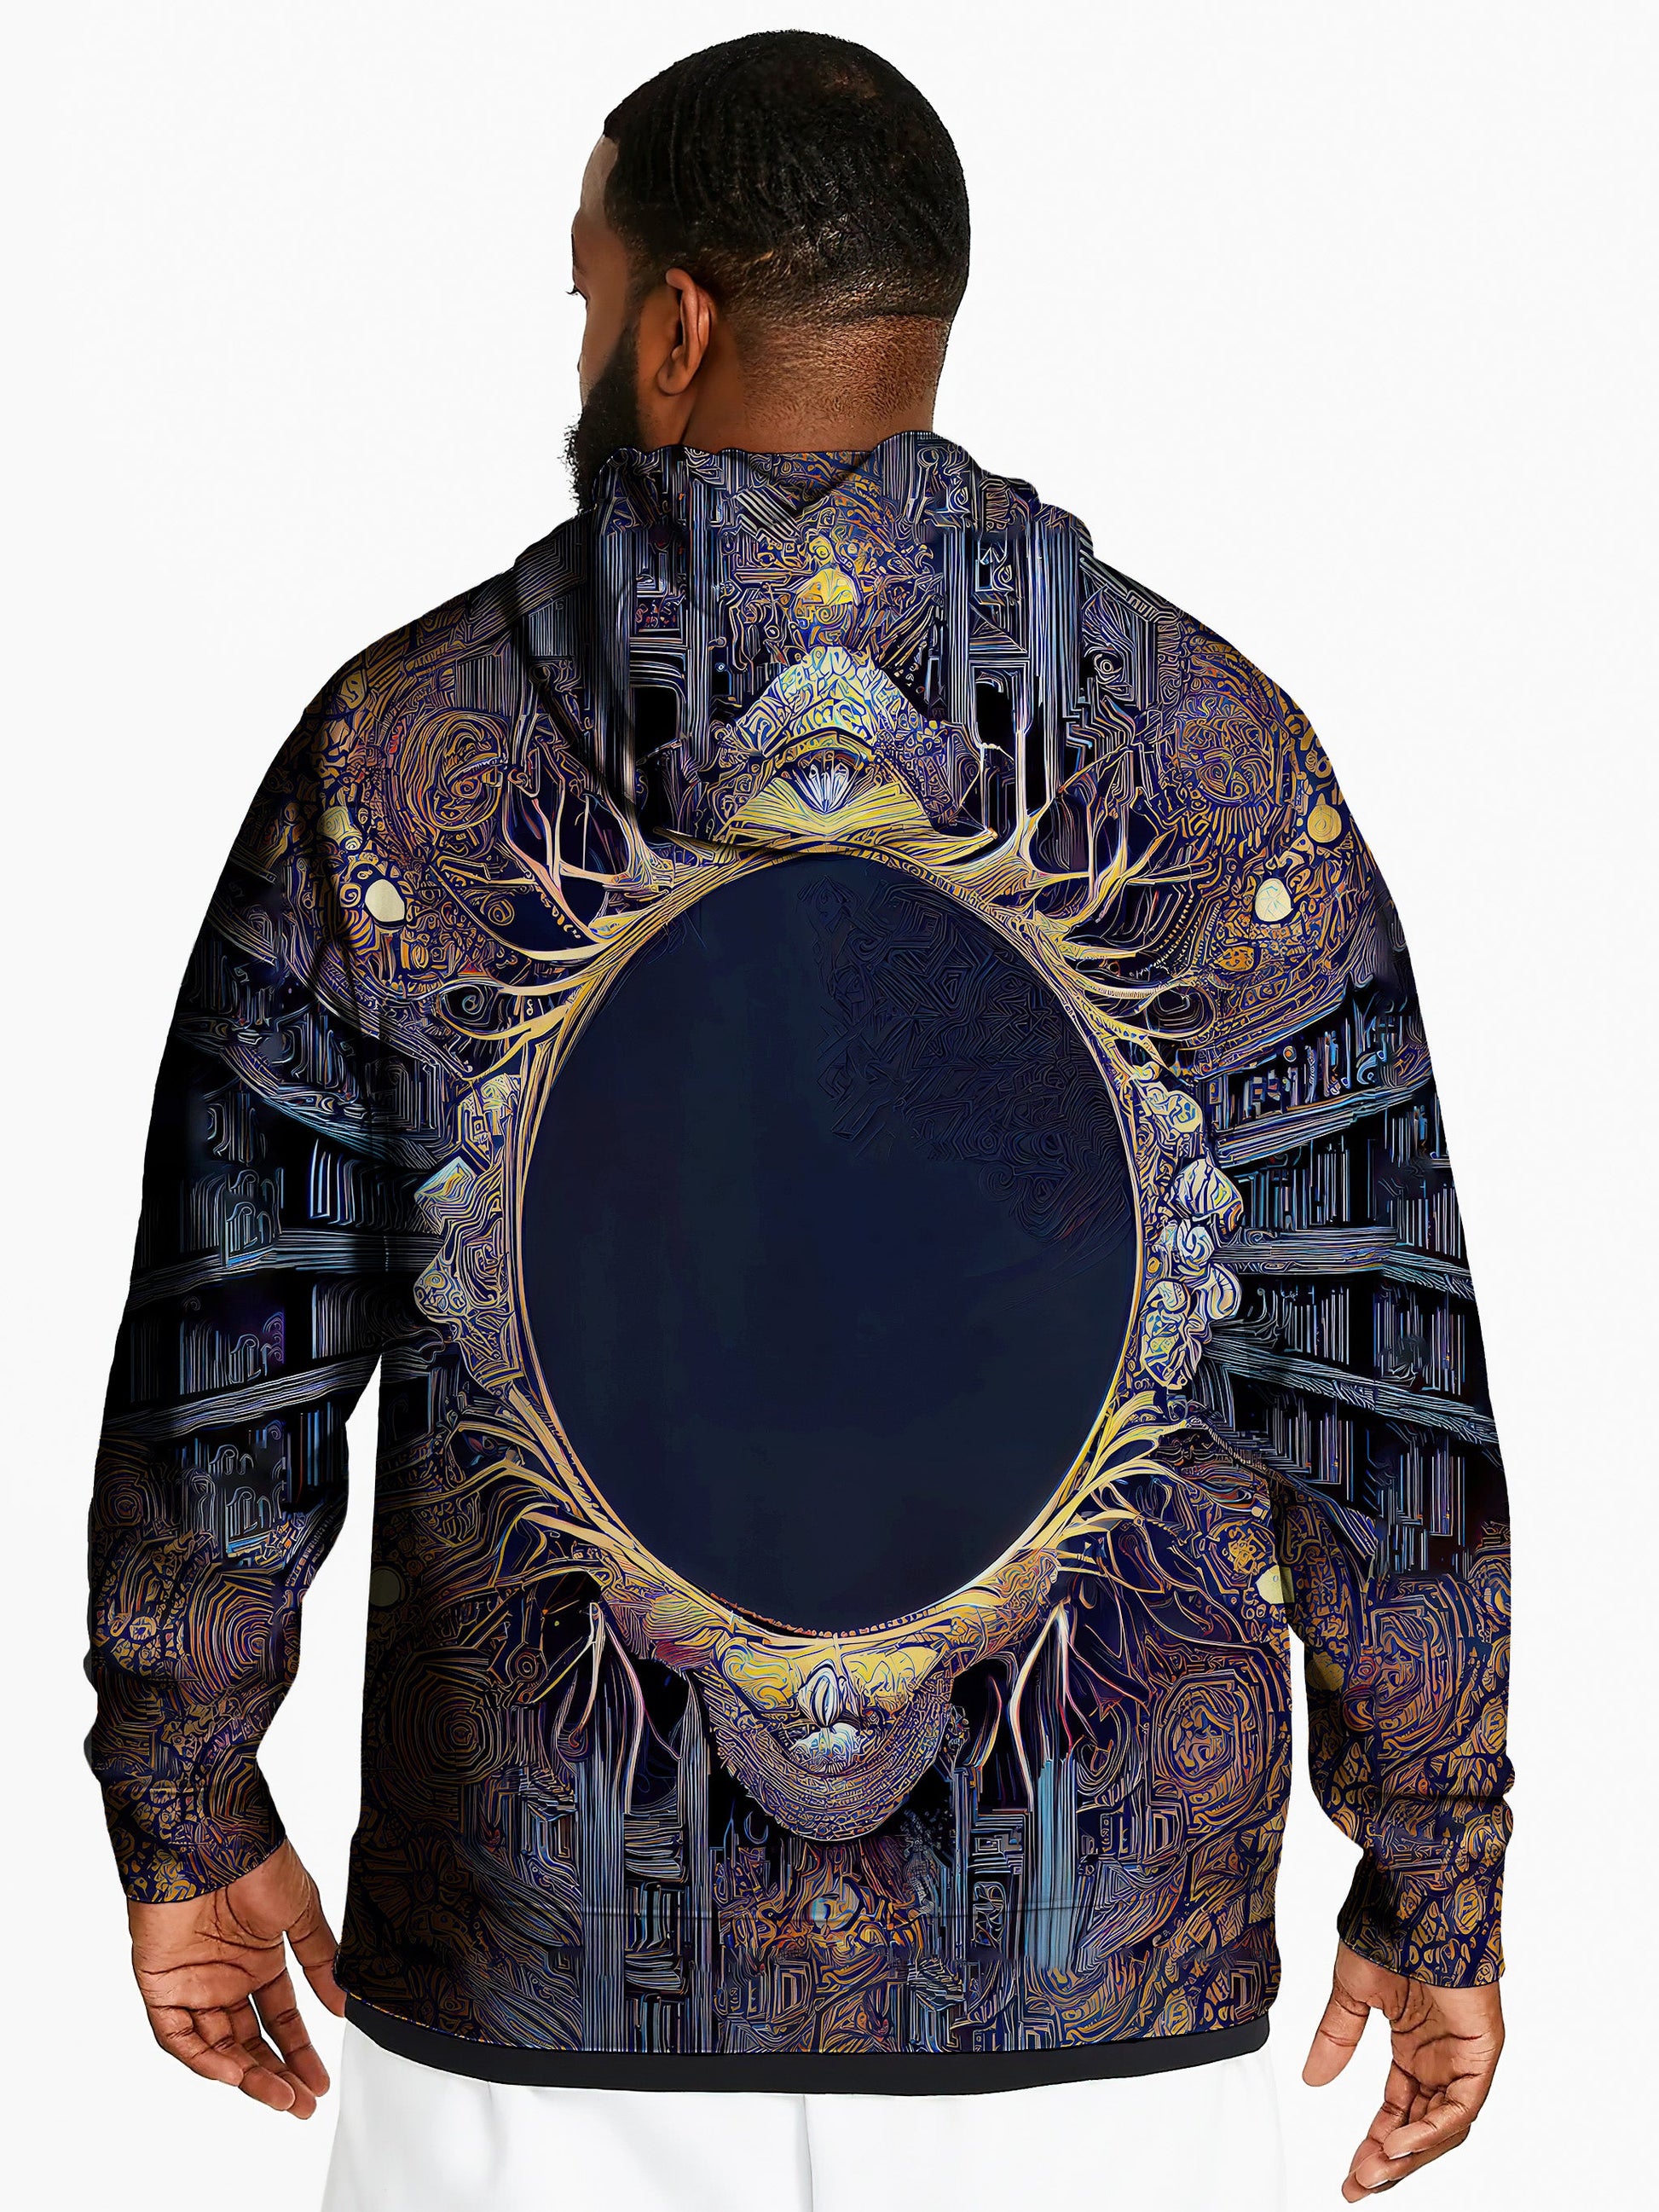 Ancient Spoils Unisex Pullover Hoodie - EDM Festival Clothing - Boogie Threads